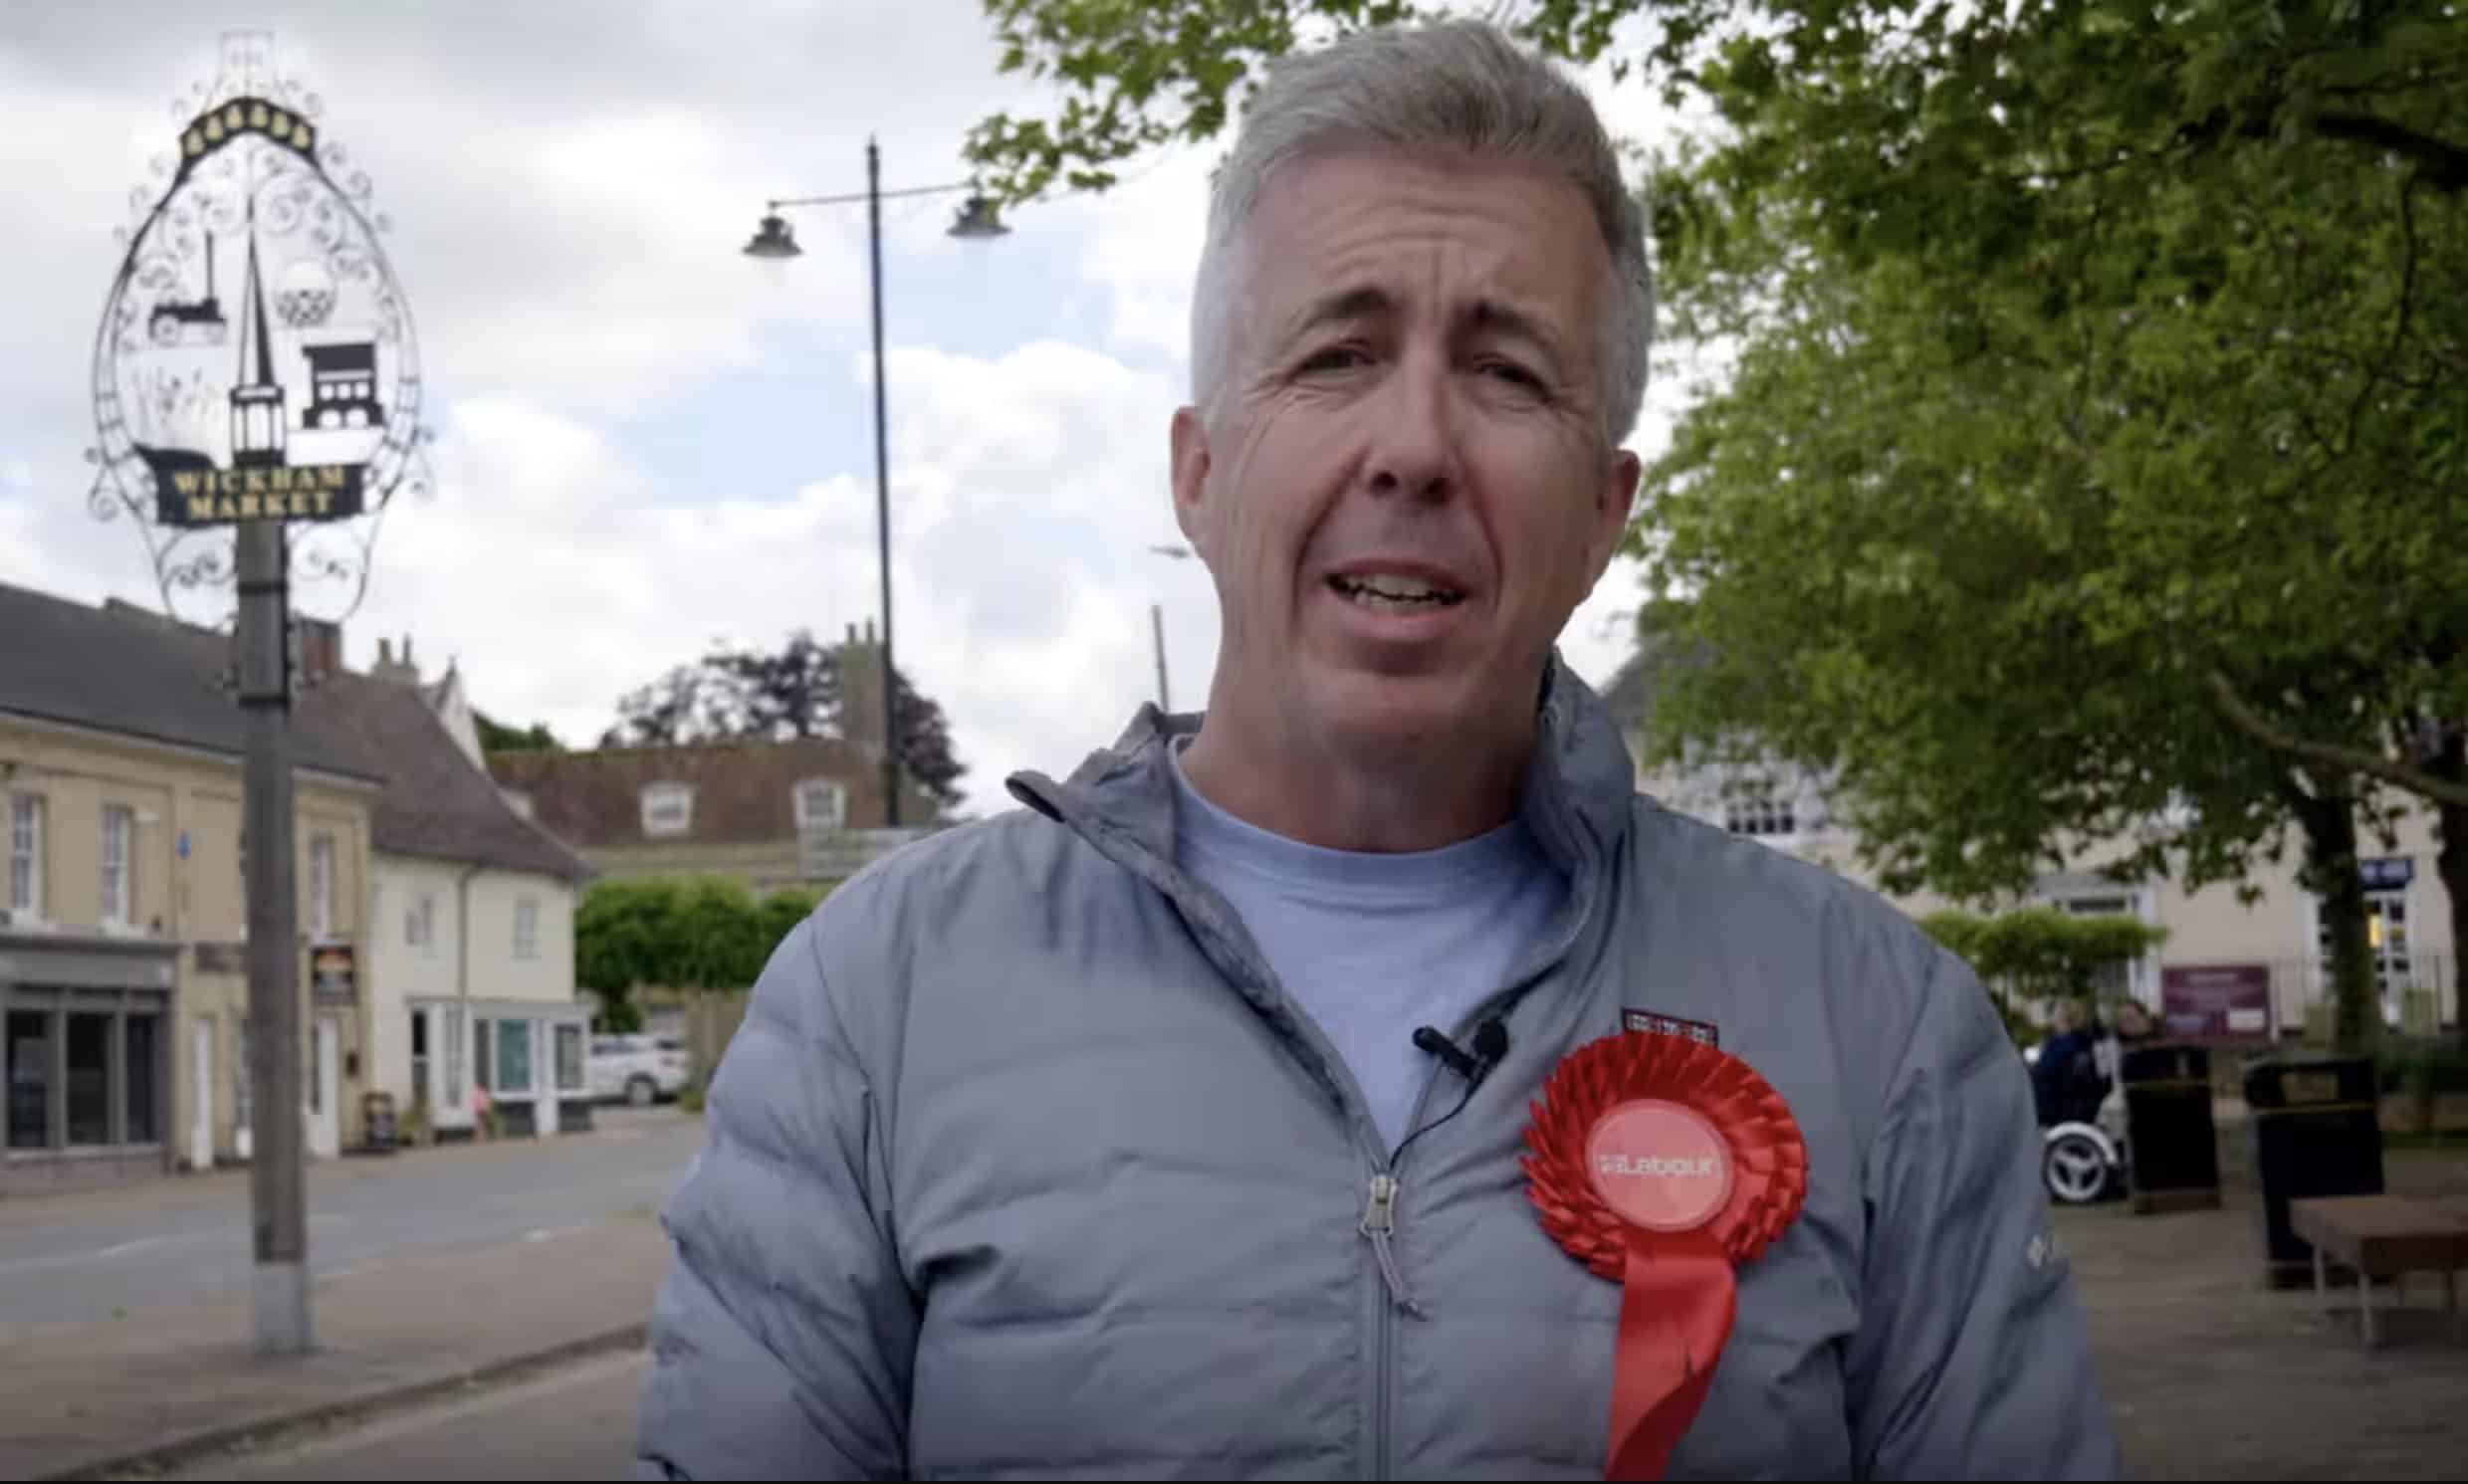 Labour candidate suspended for betting on himself to LOSE at the General Election